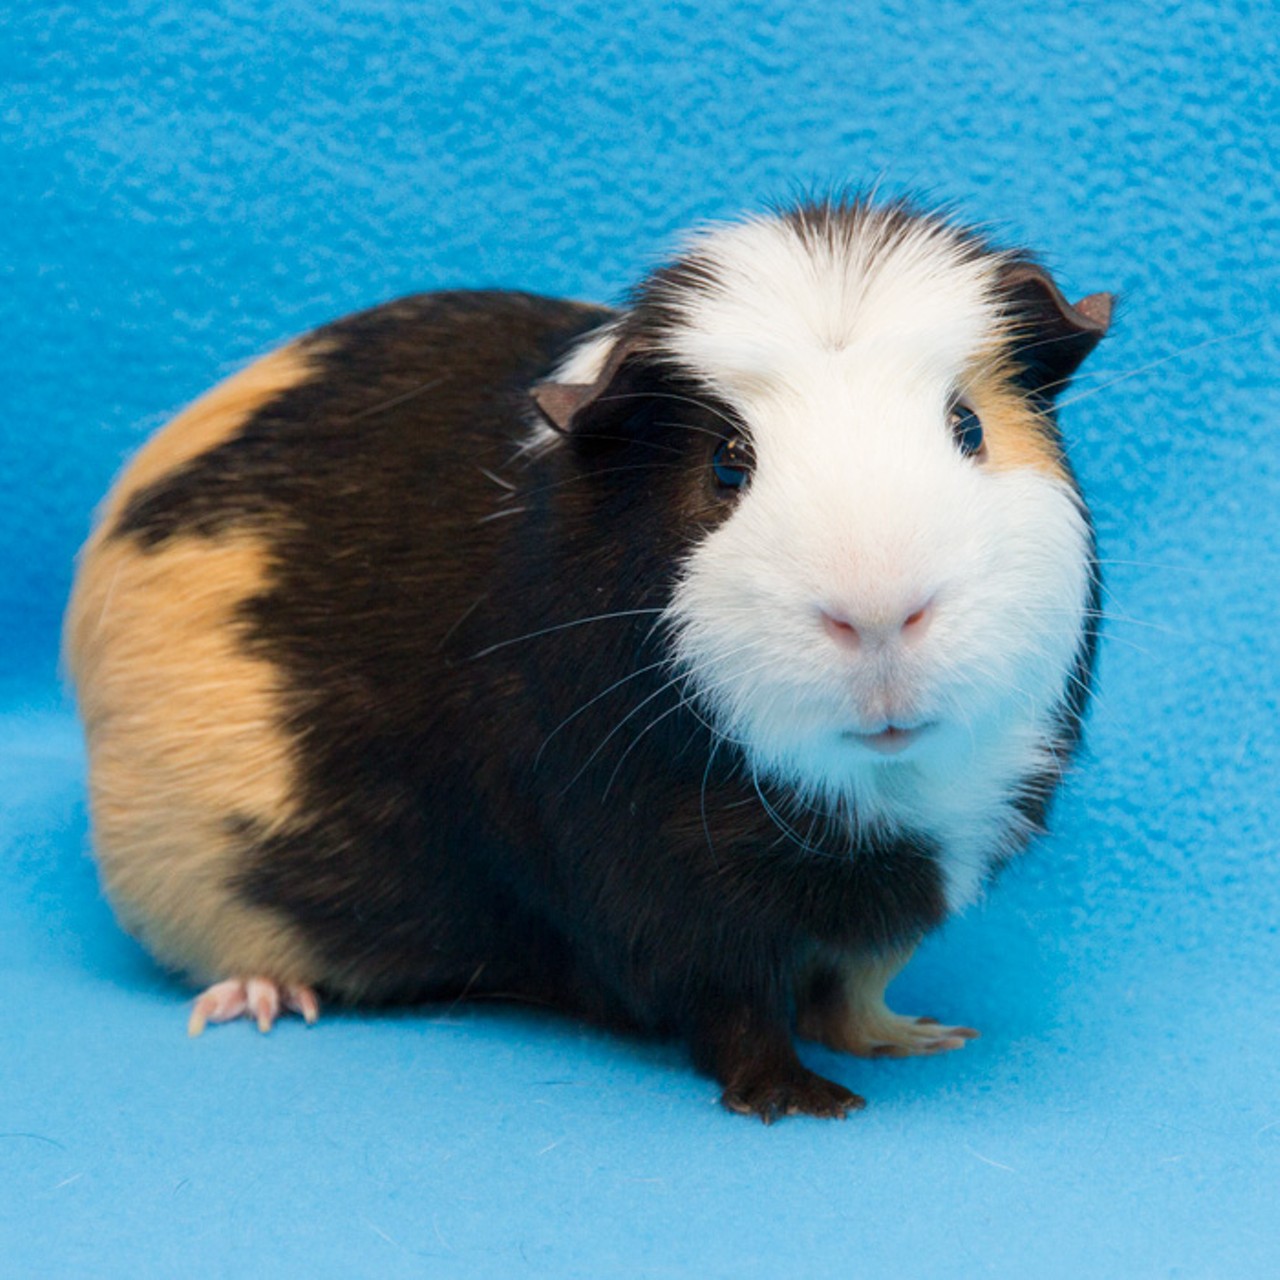  NAME: Pepper
GENDER: Male
BREED: Guinea Pig
AGE: 3 years
SPECIAL CONSIDERATIONS: Prefers to be your only guinea pig
REASON I CAME TO MHS: Owner surrender
LOCATION: Berman Center for Animal Care in Westland
ID NUMBER: 863352